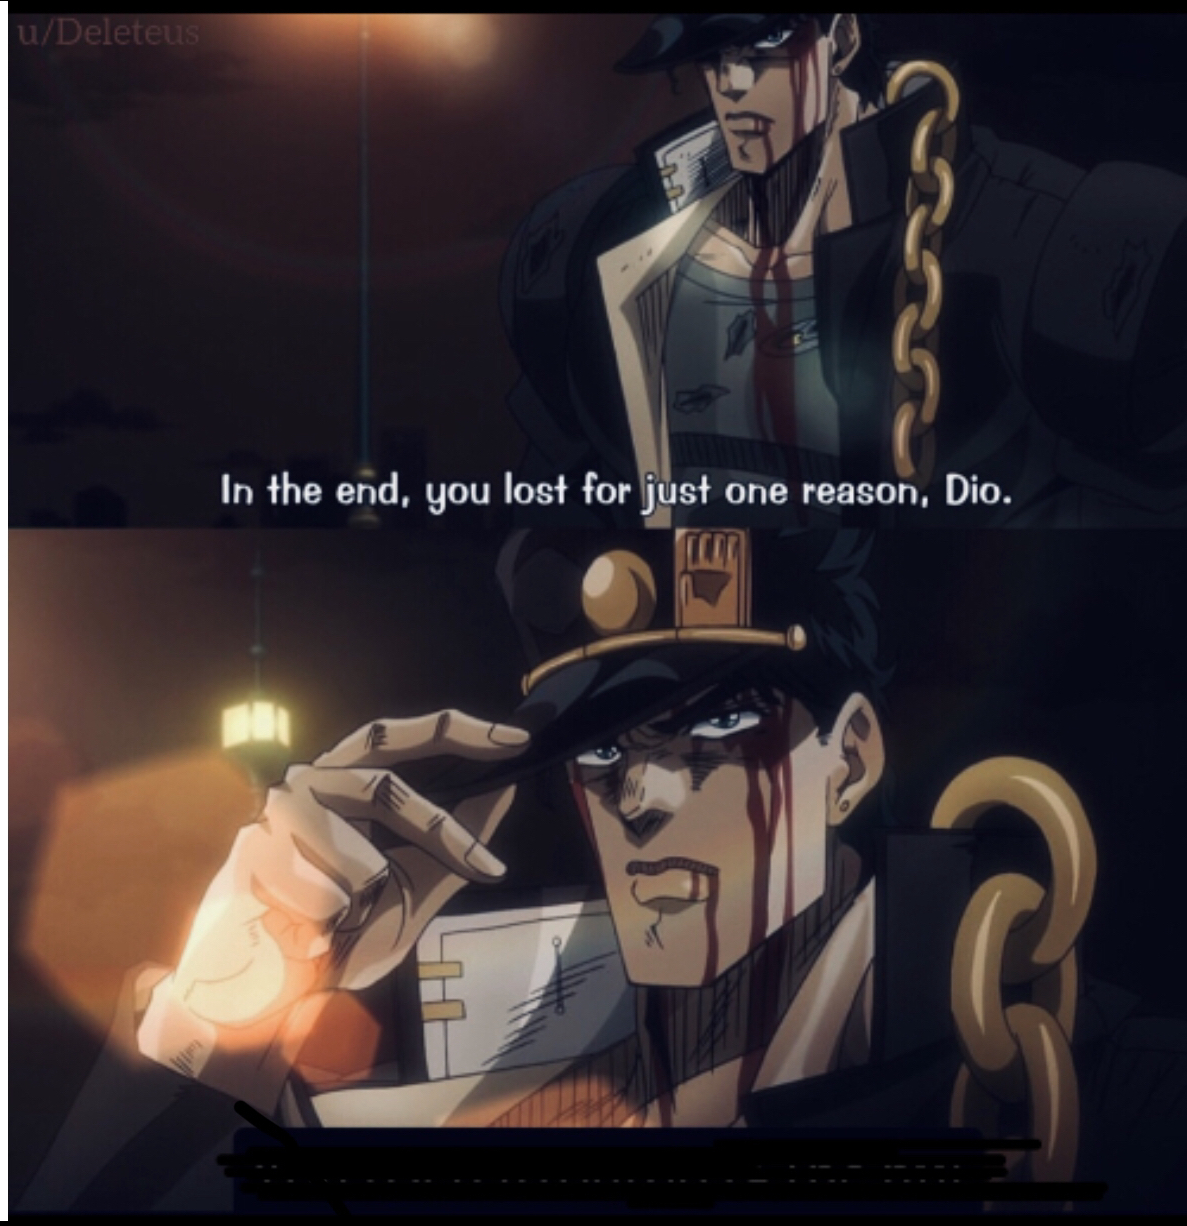 High Quality The reason Dio lost Blank Meme Template